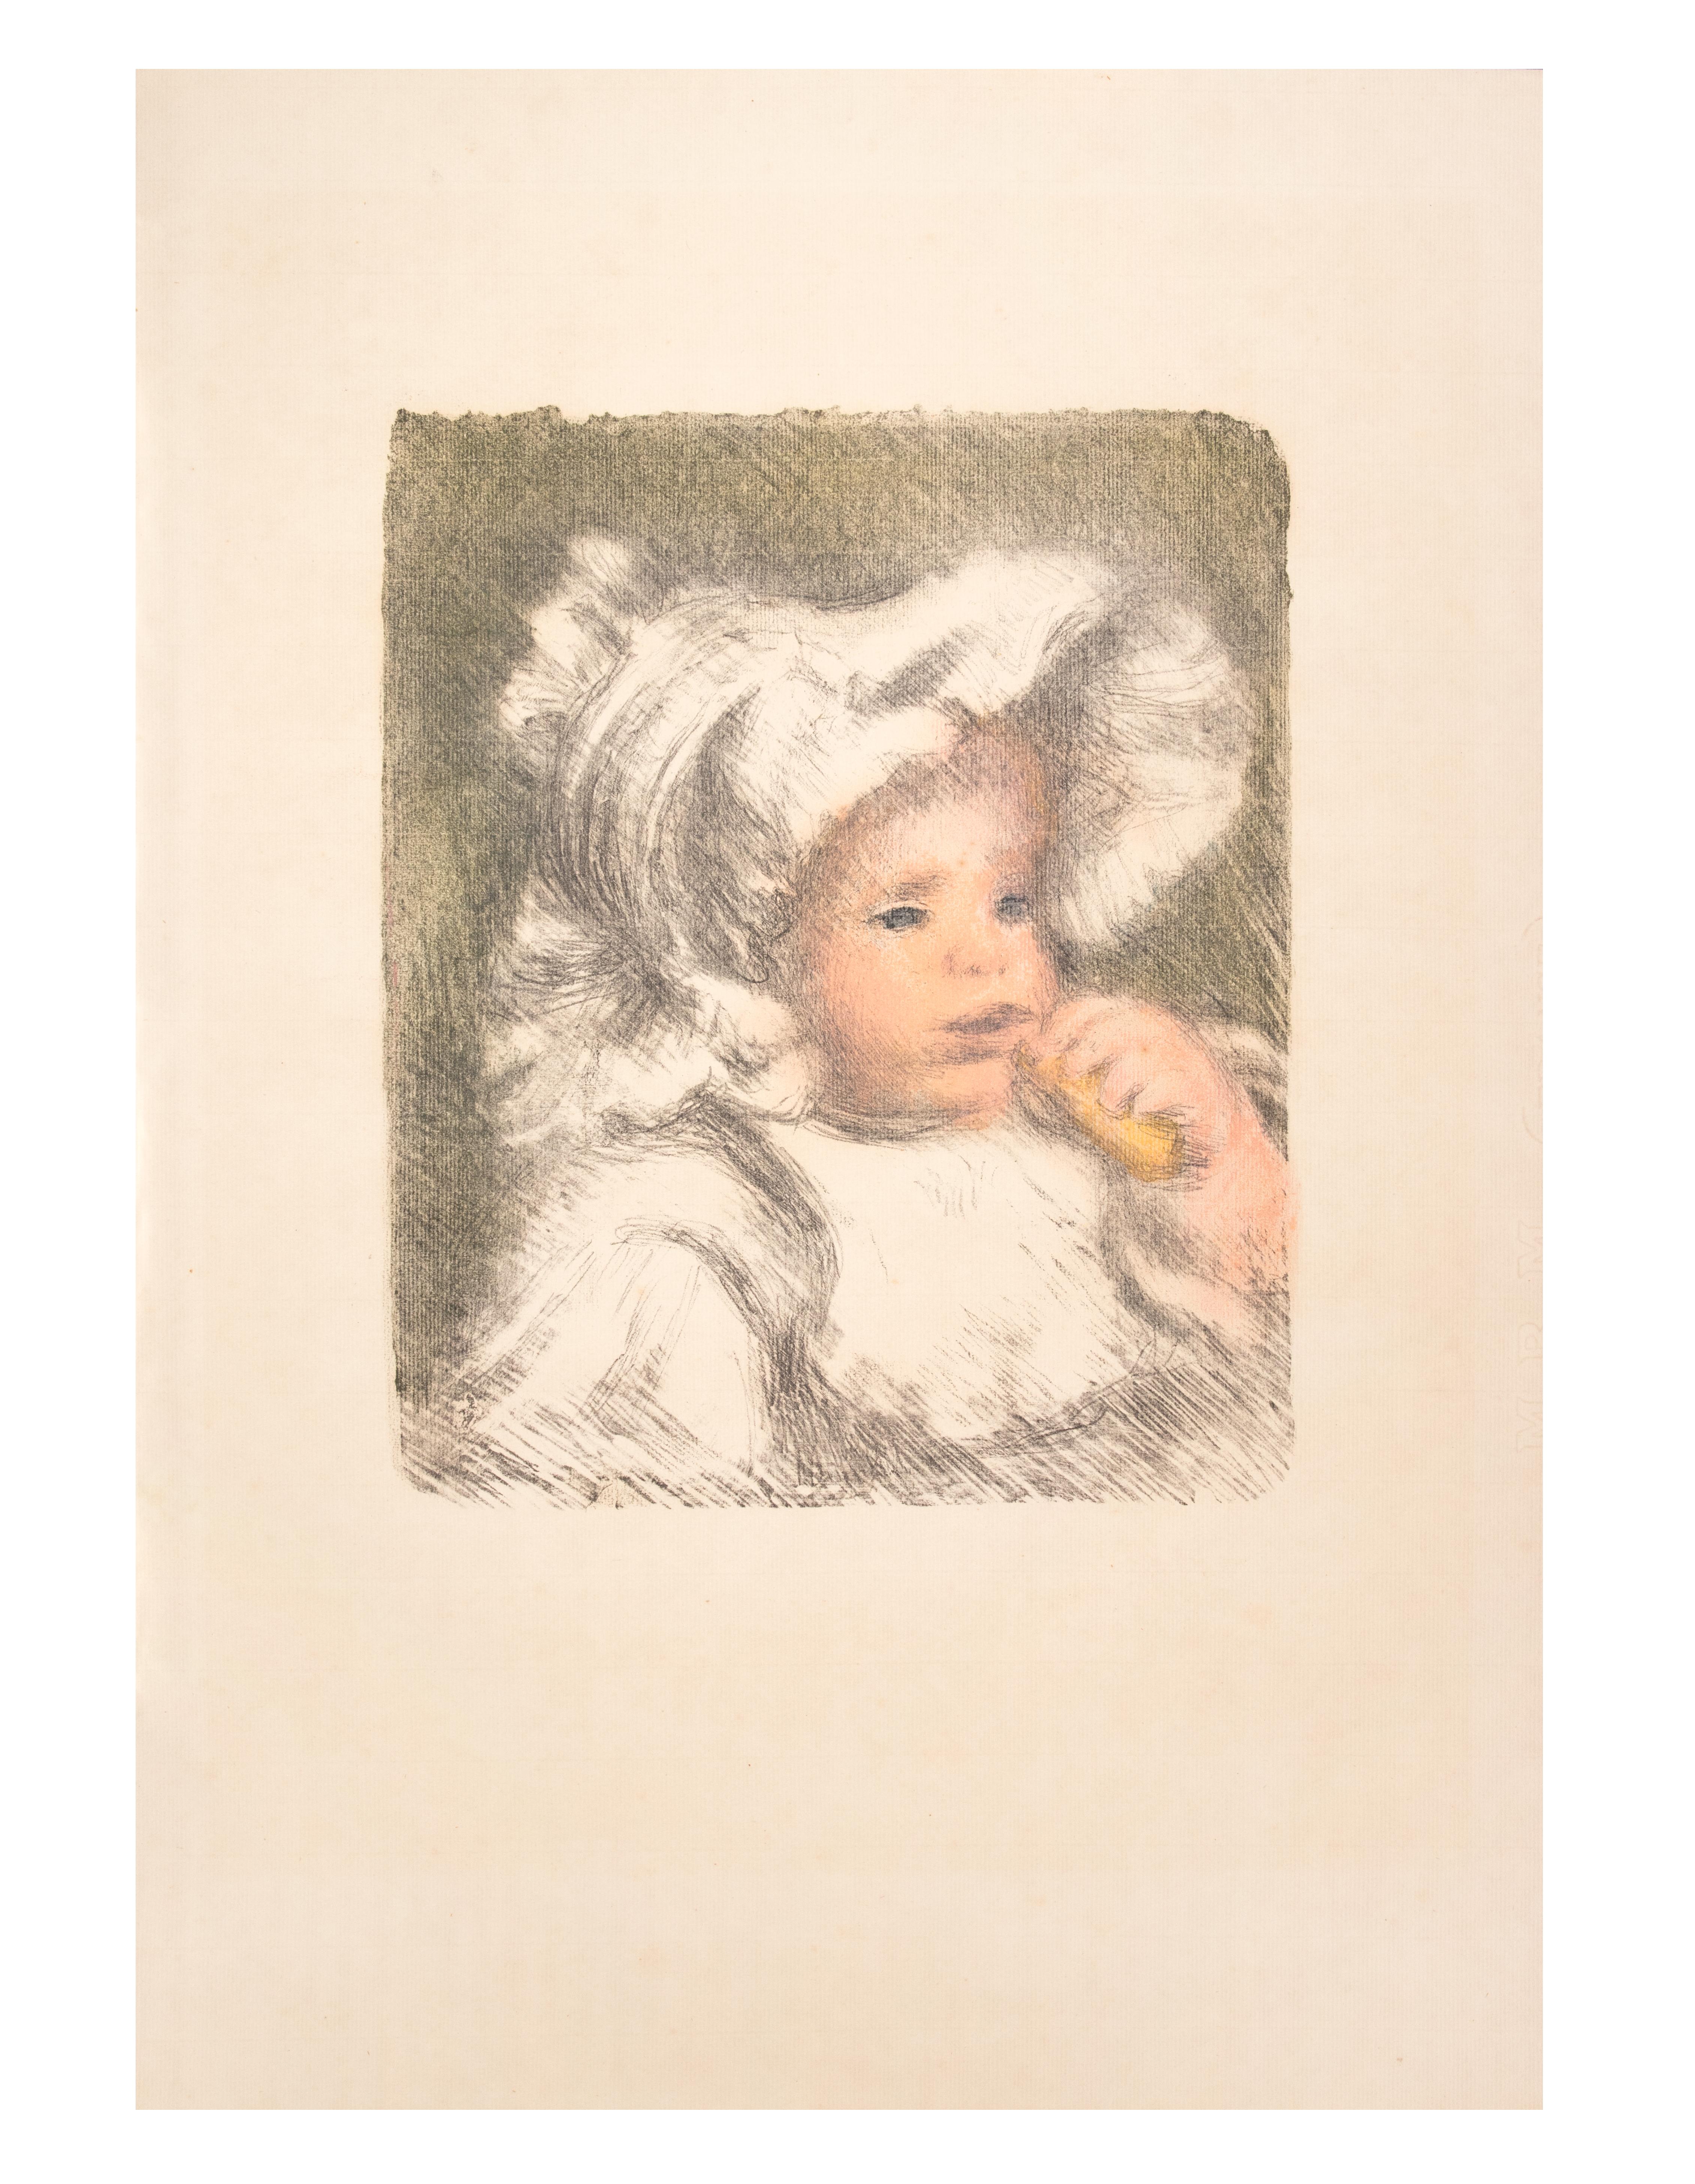 Edition of 100 prints, not signed.
One of the most celebrated graphic works of Renoir, showing his son, the future Director Jean Renoir. 
Belogs to the suite “L’Album d’estampes originales de la Galerie Vollard”.

Published by Auguste Clot in